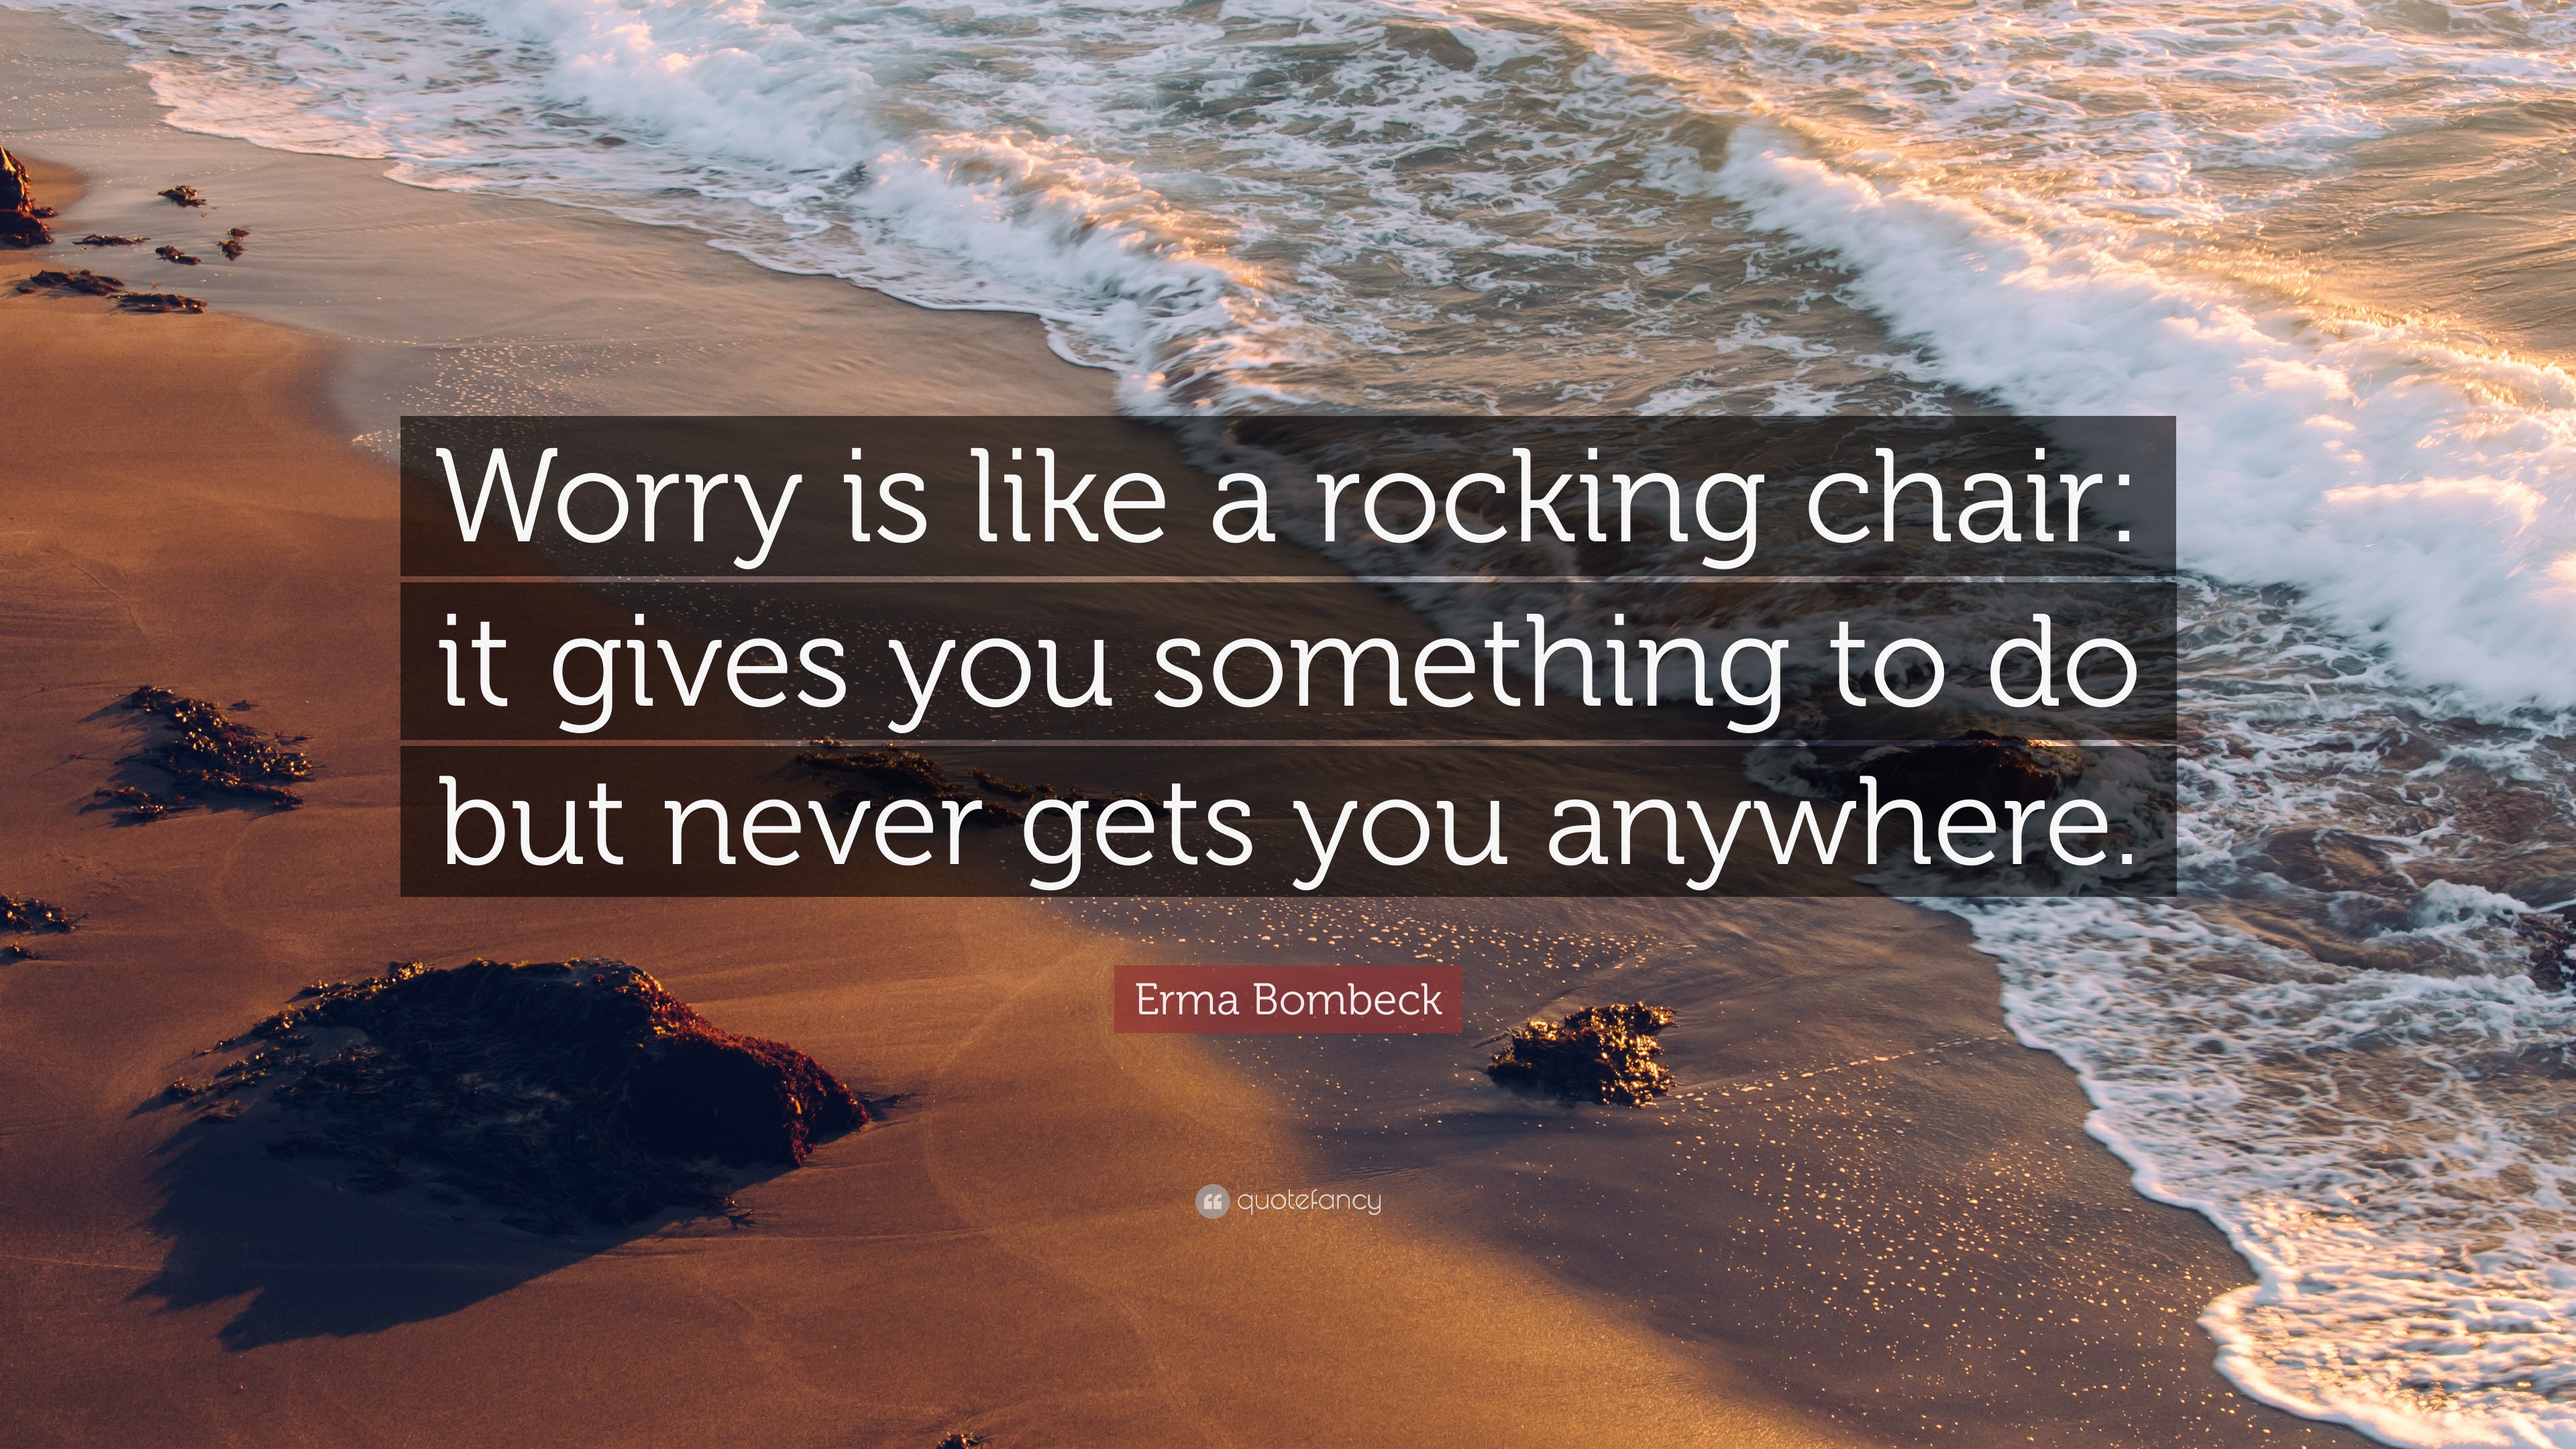 Erma Bombeck Quote: "Worry is like a rocking chair: it gives you something to do but never gets ...